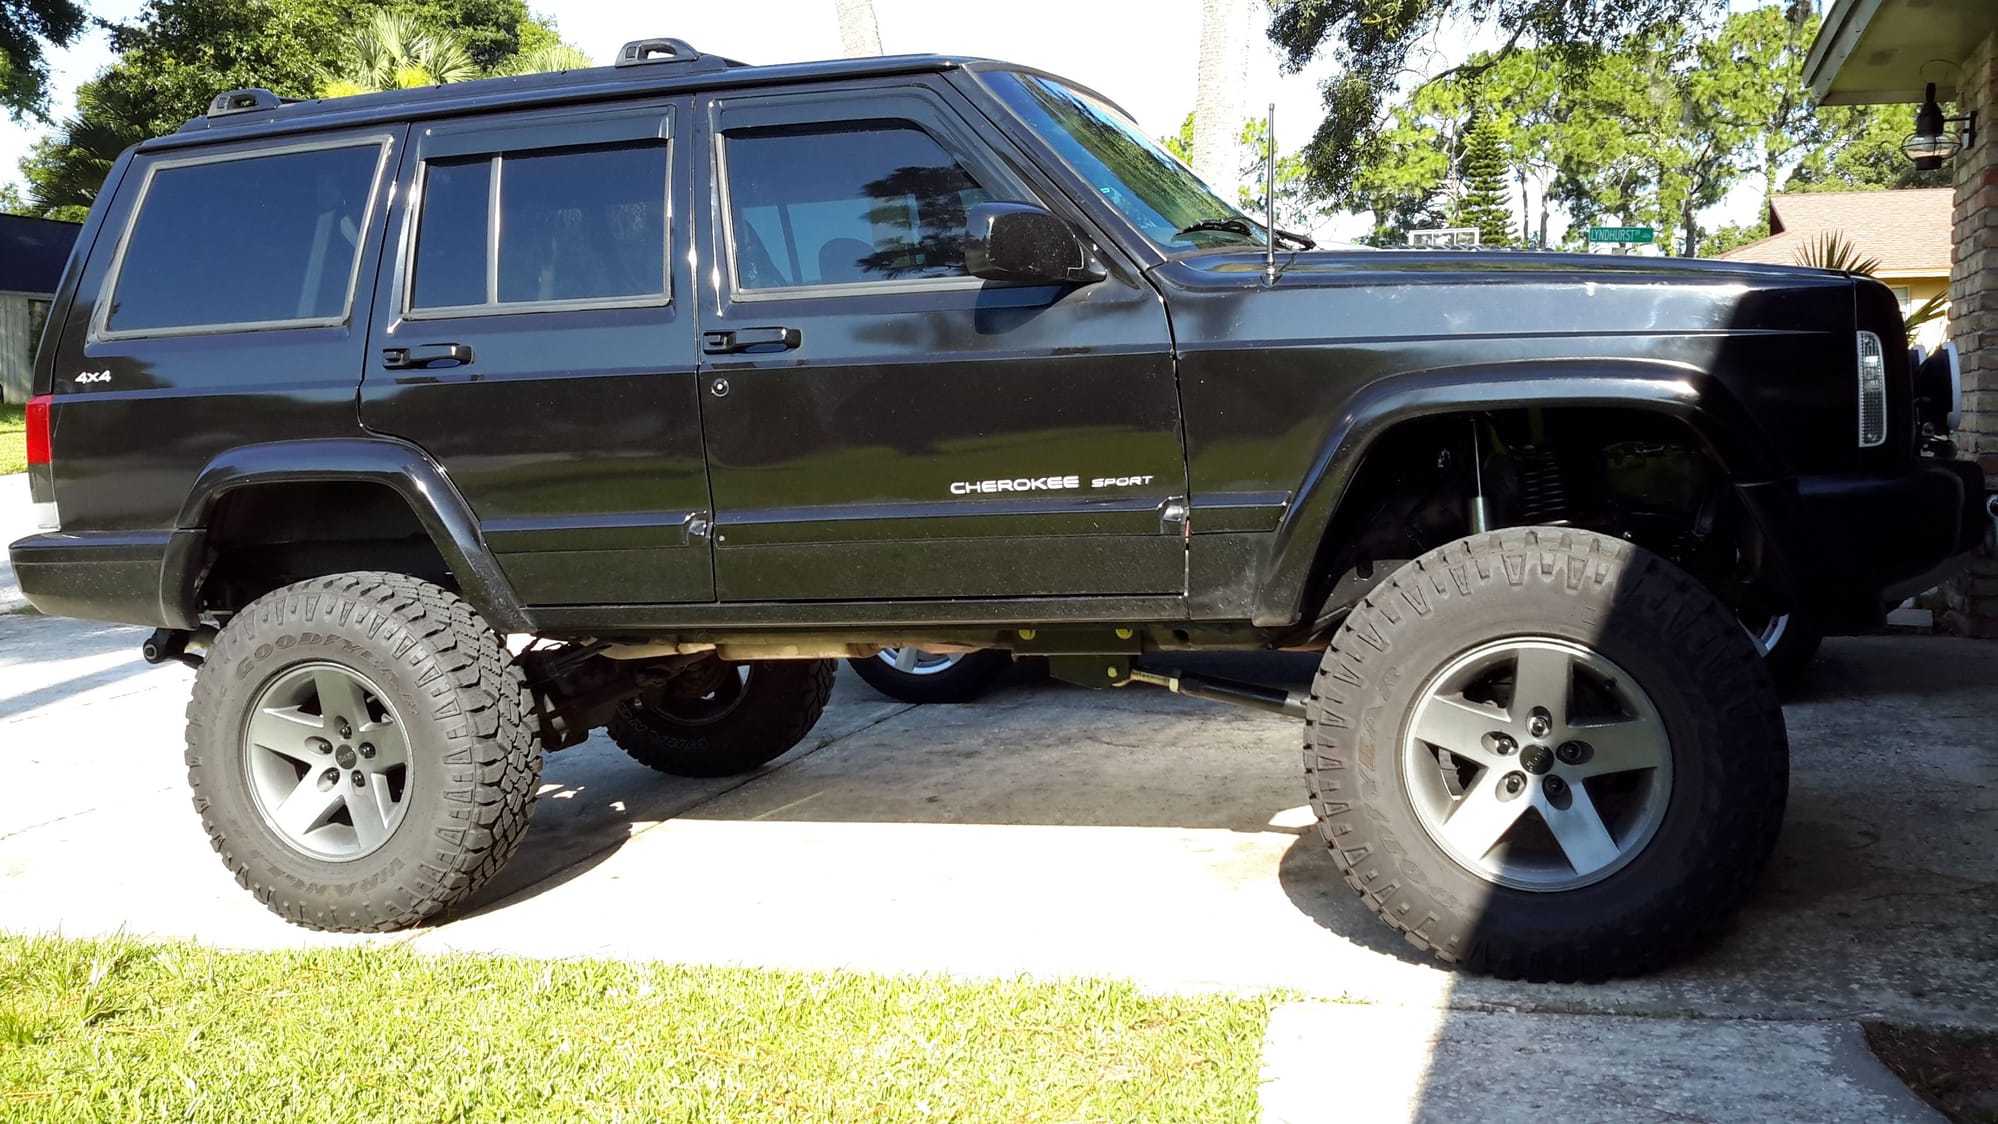 rubicon wheels and tires do the fit an xj? - Page 2 - Jeep Cherokee Forum